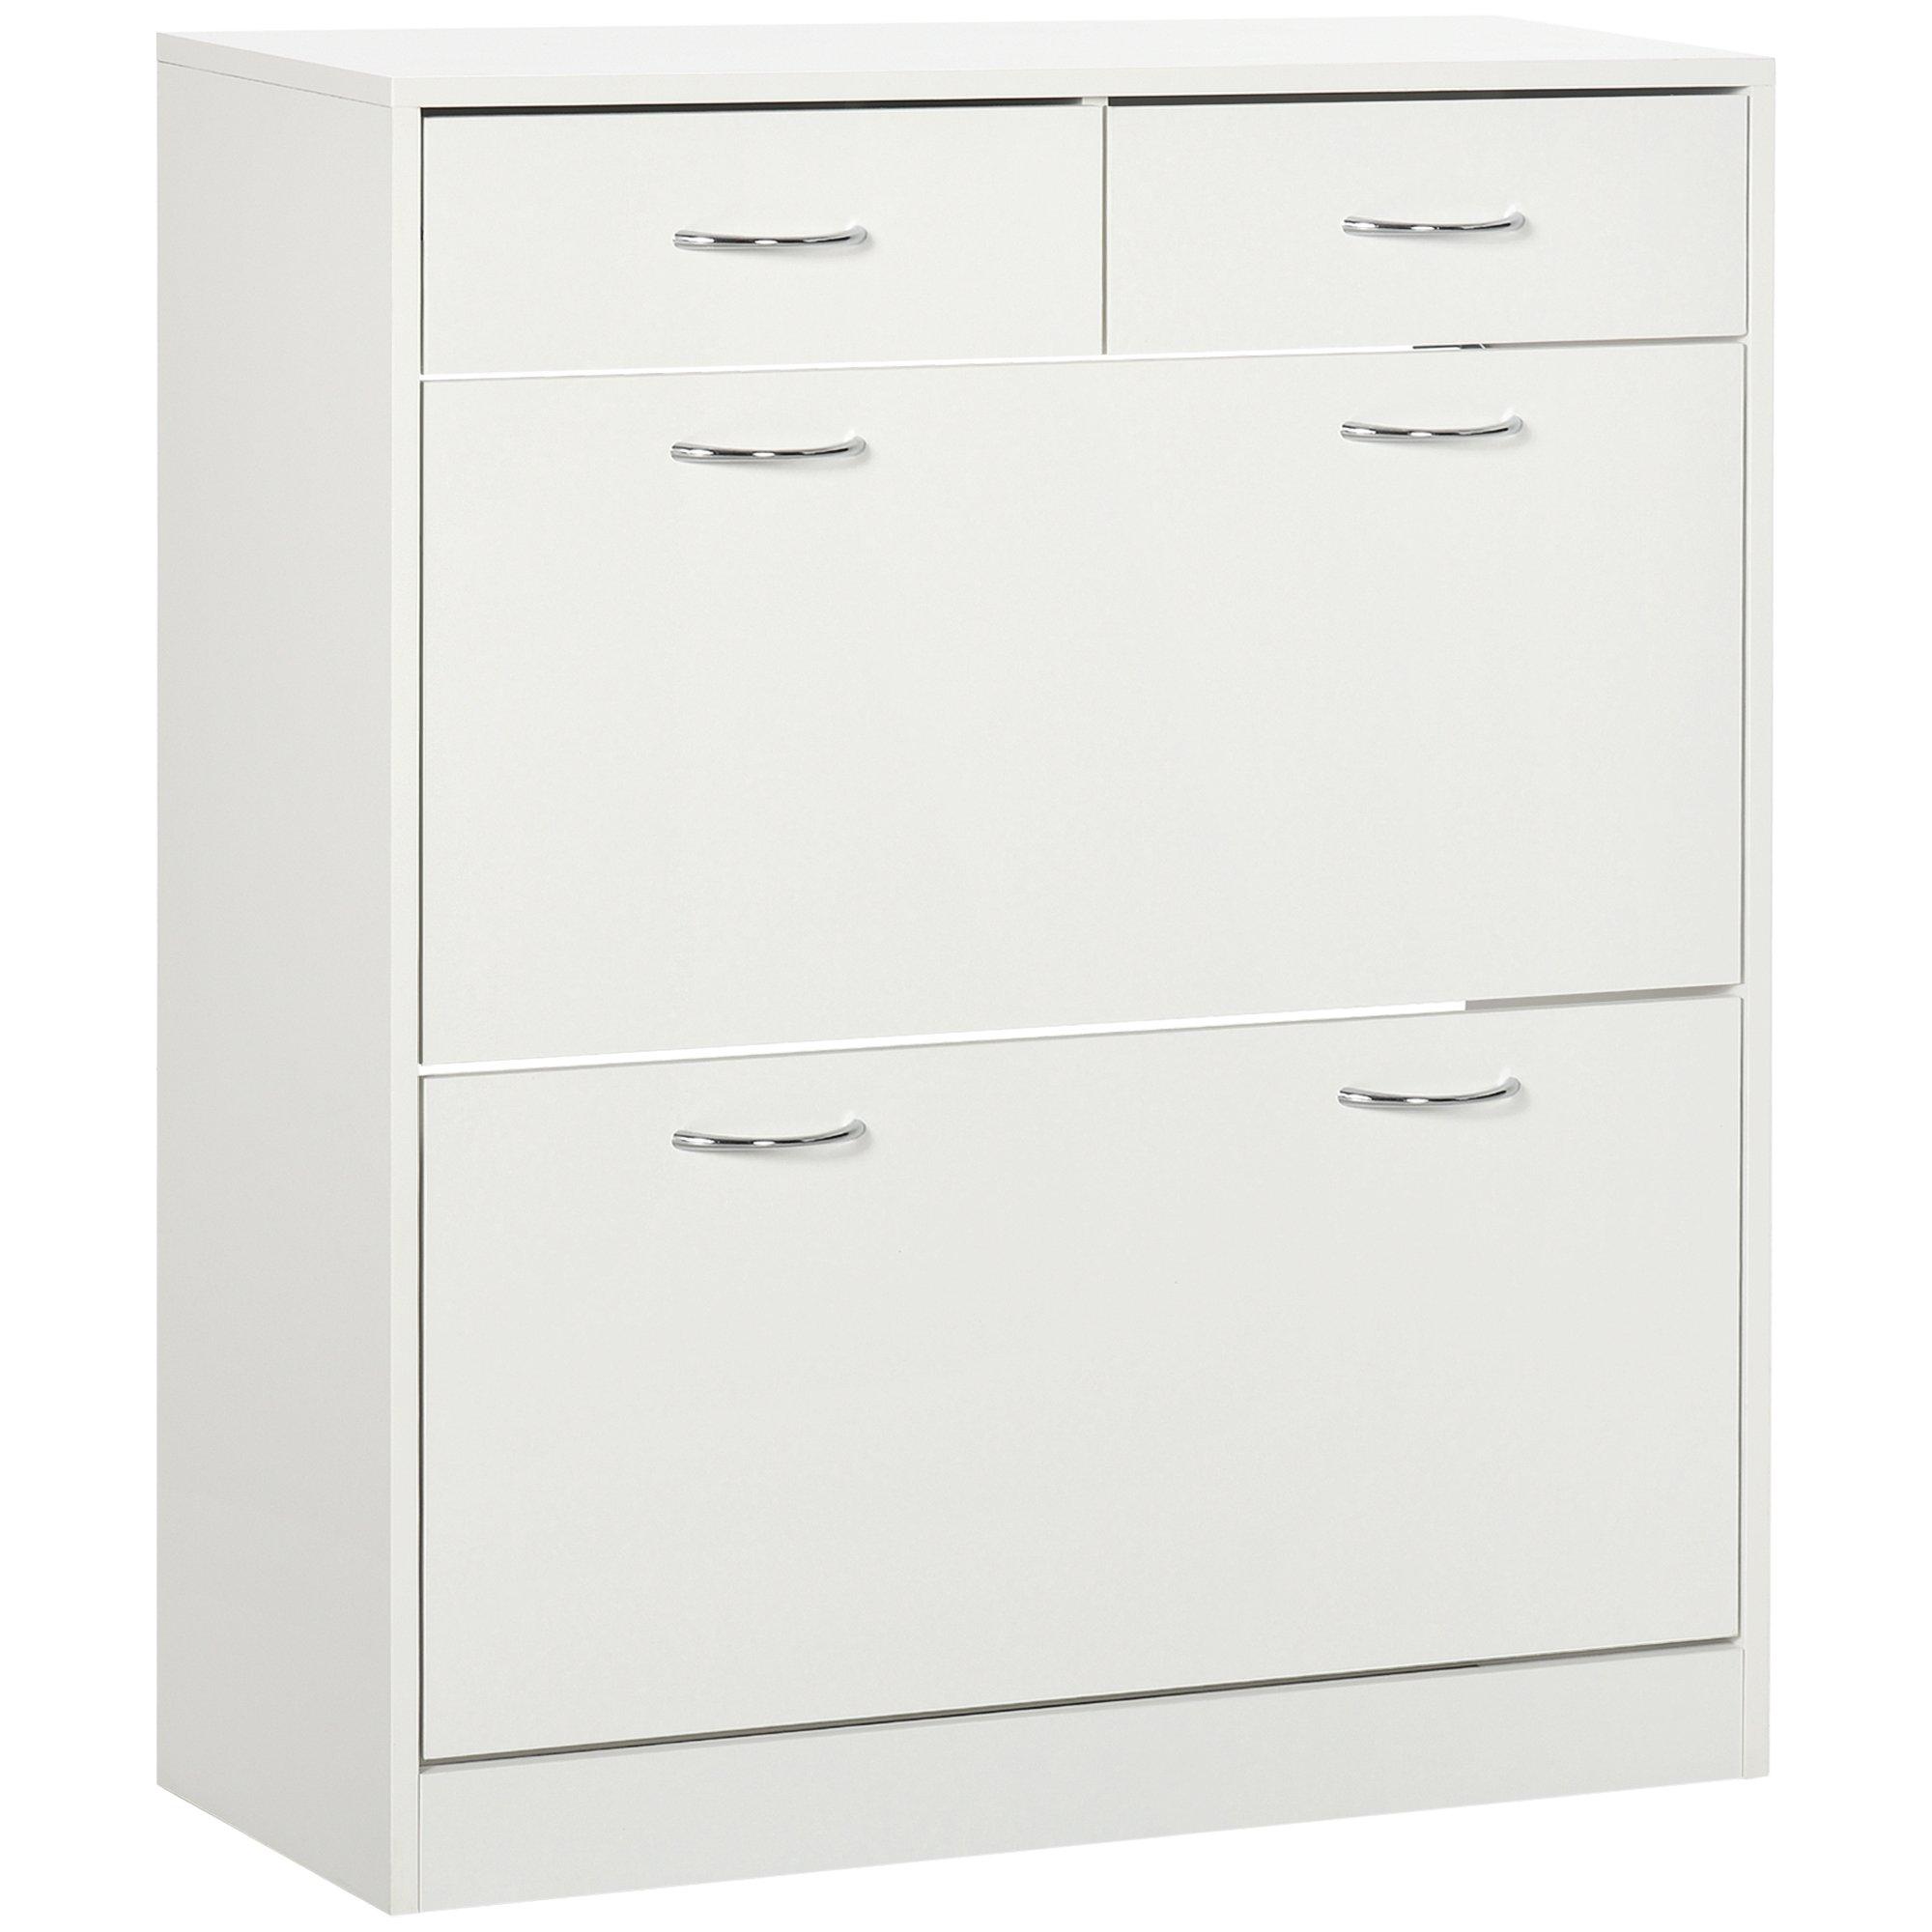 Shoe Storage Cabinet with 2 Flip Drawers 2 Slide Out Drawers